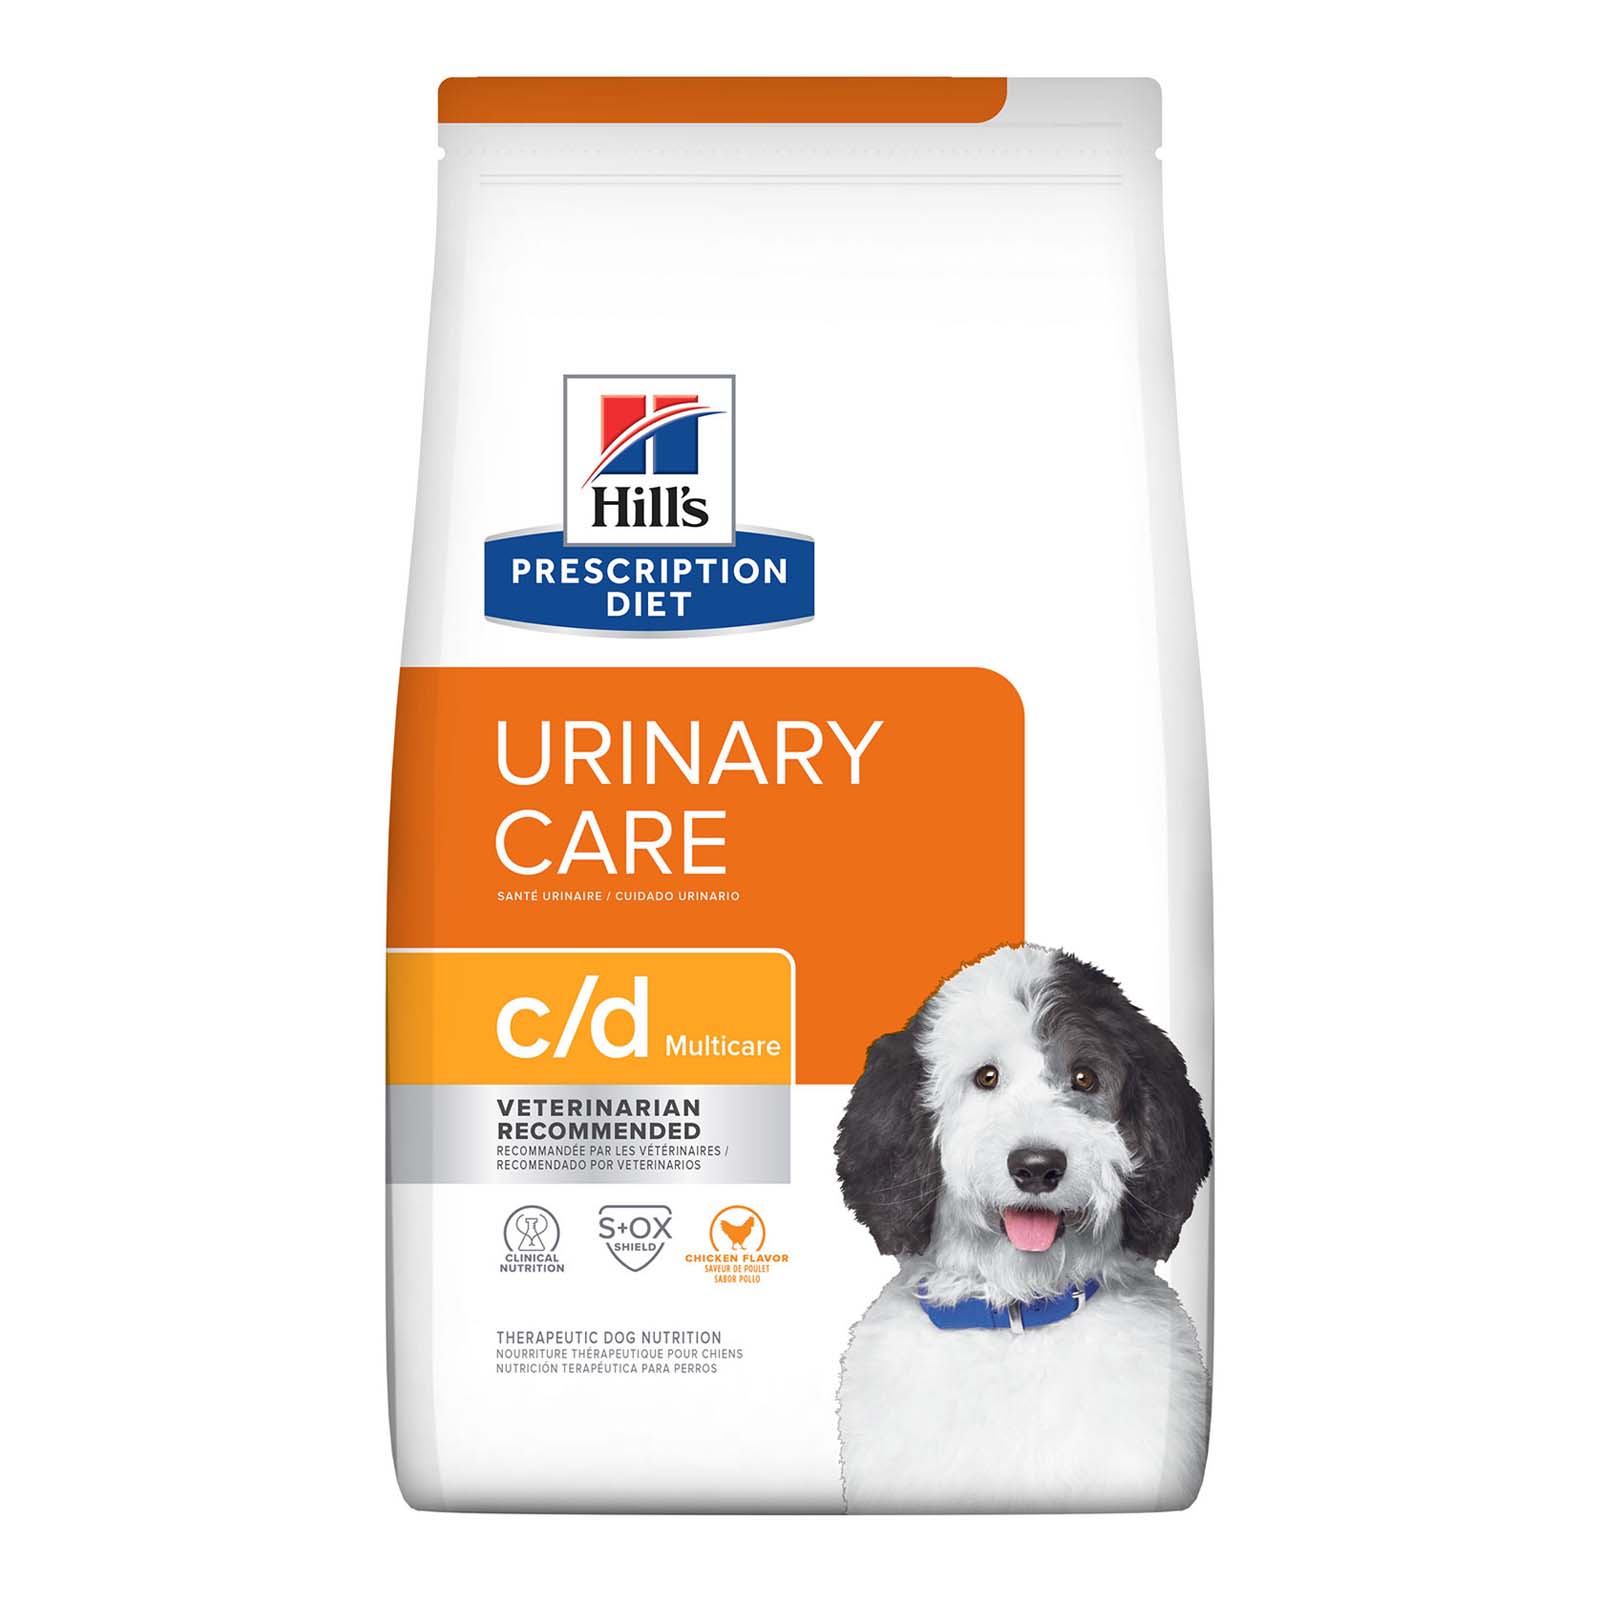 Hill's Prescription Diet c/d Canine Multicare Urinary Care with Chicken Dry